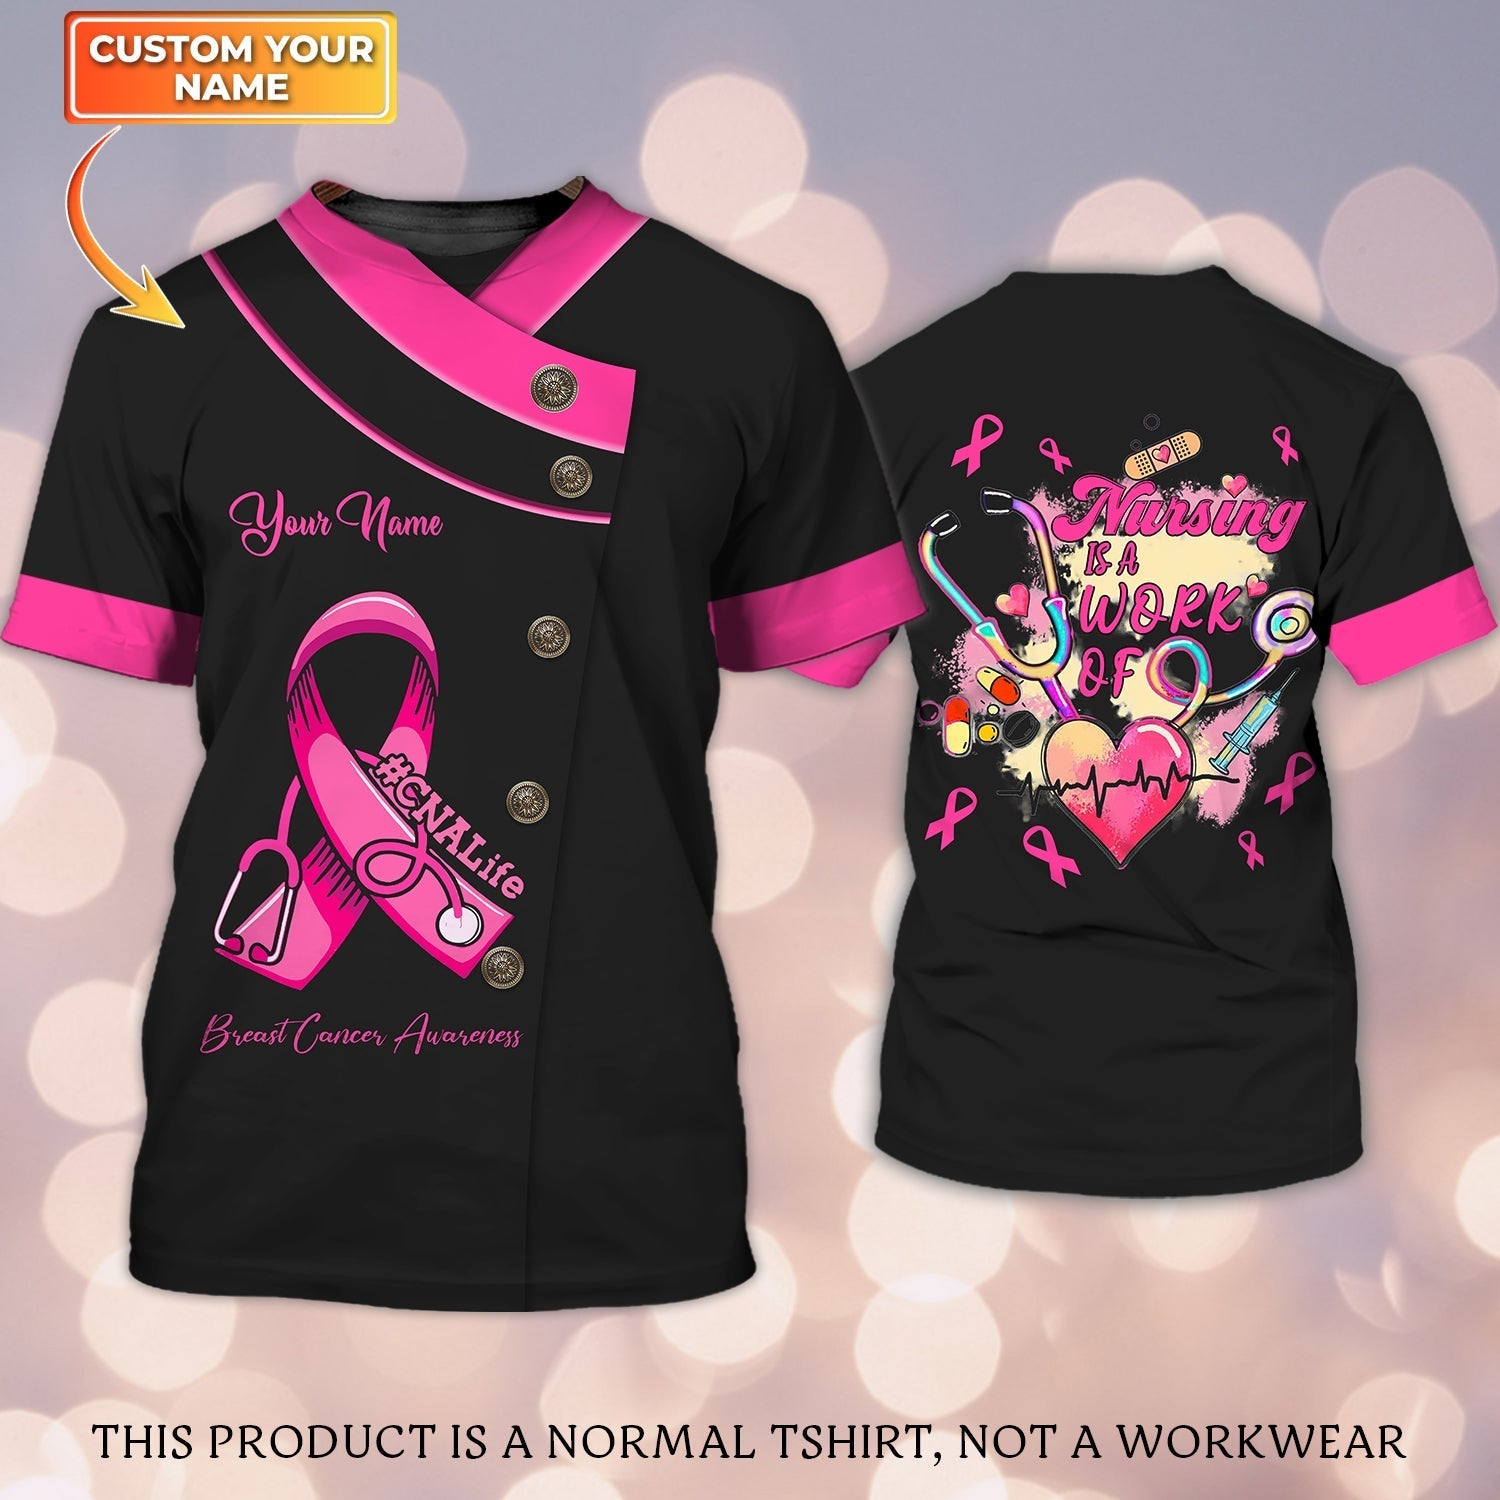 Cnalife Breast Cancer Awareness Shirt/ Personalized Name 3D Tshirt Tad (Non Workwear)